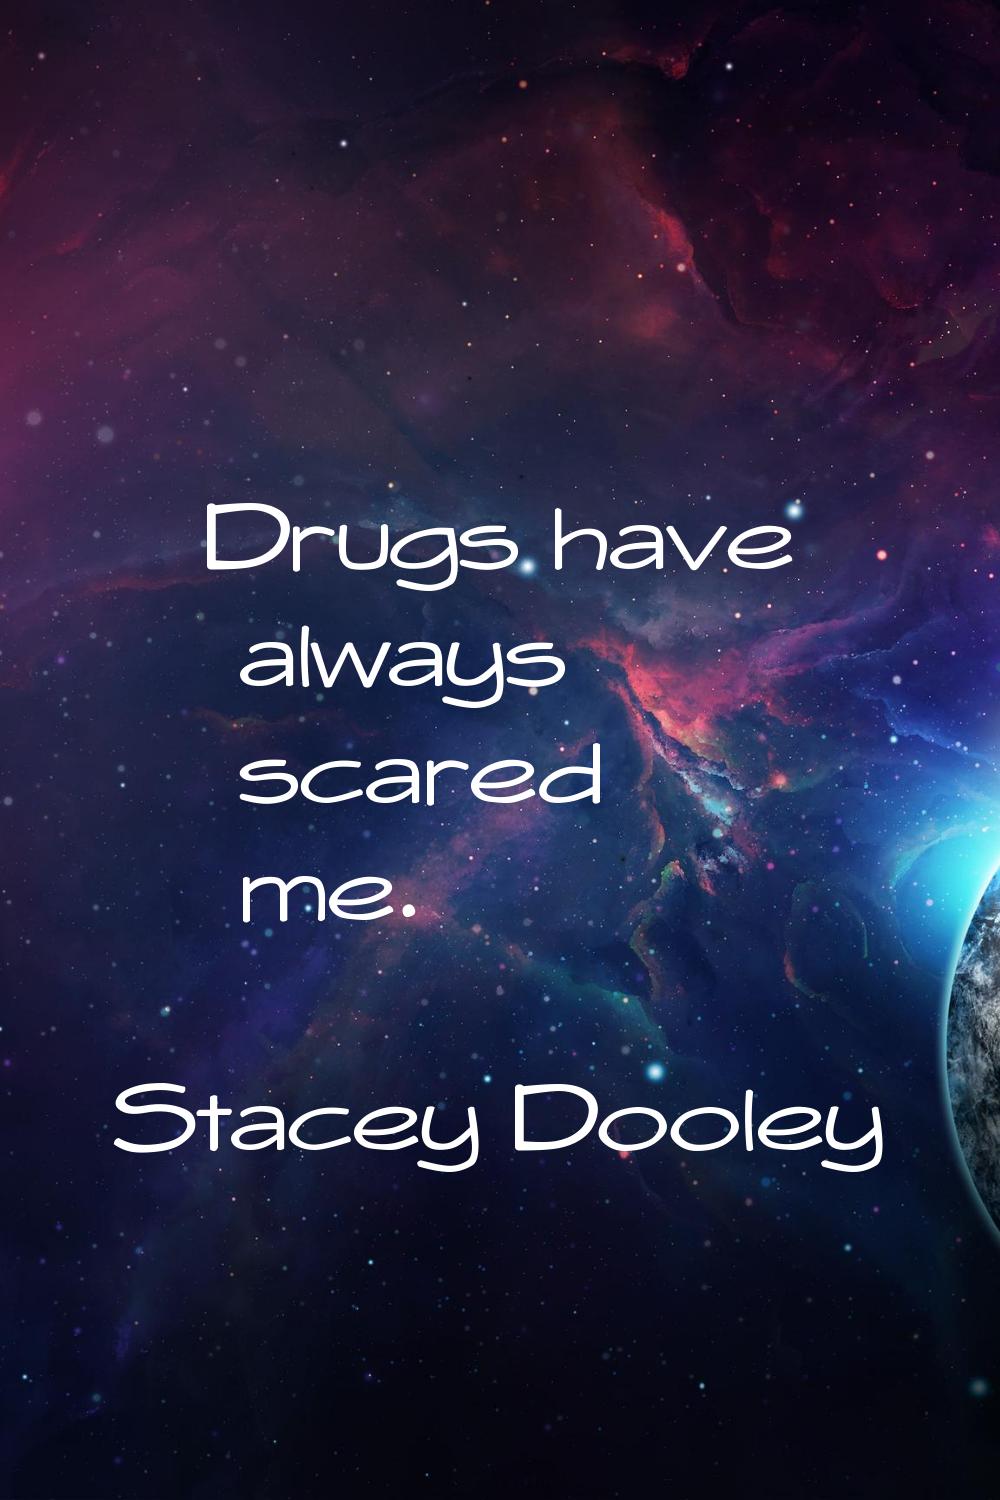 Drugs have always scared me.